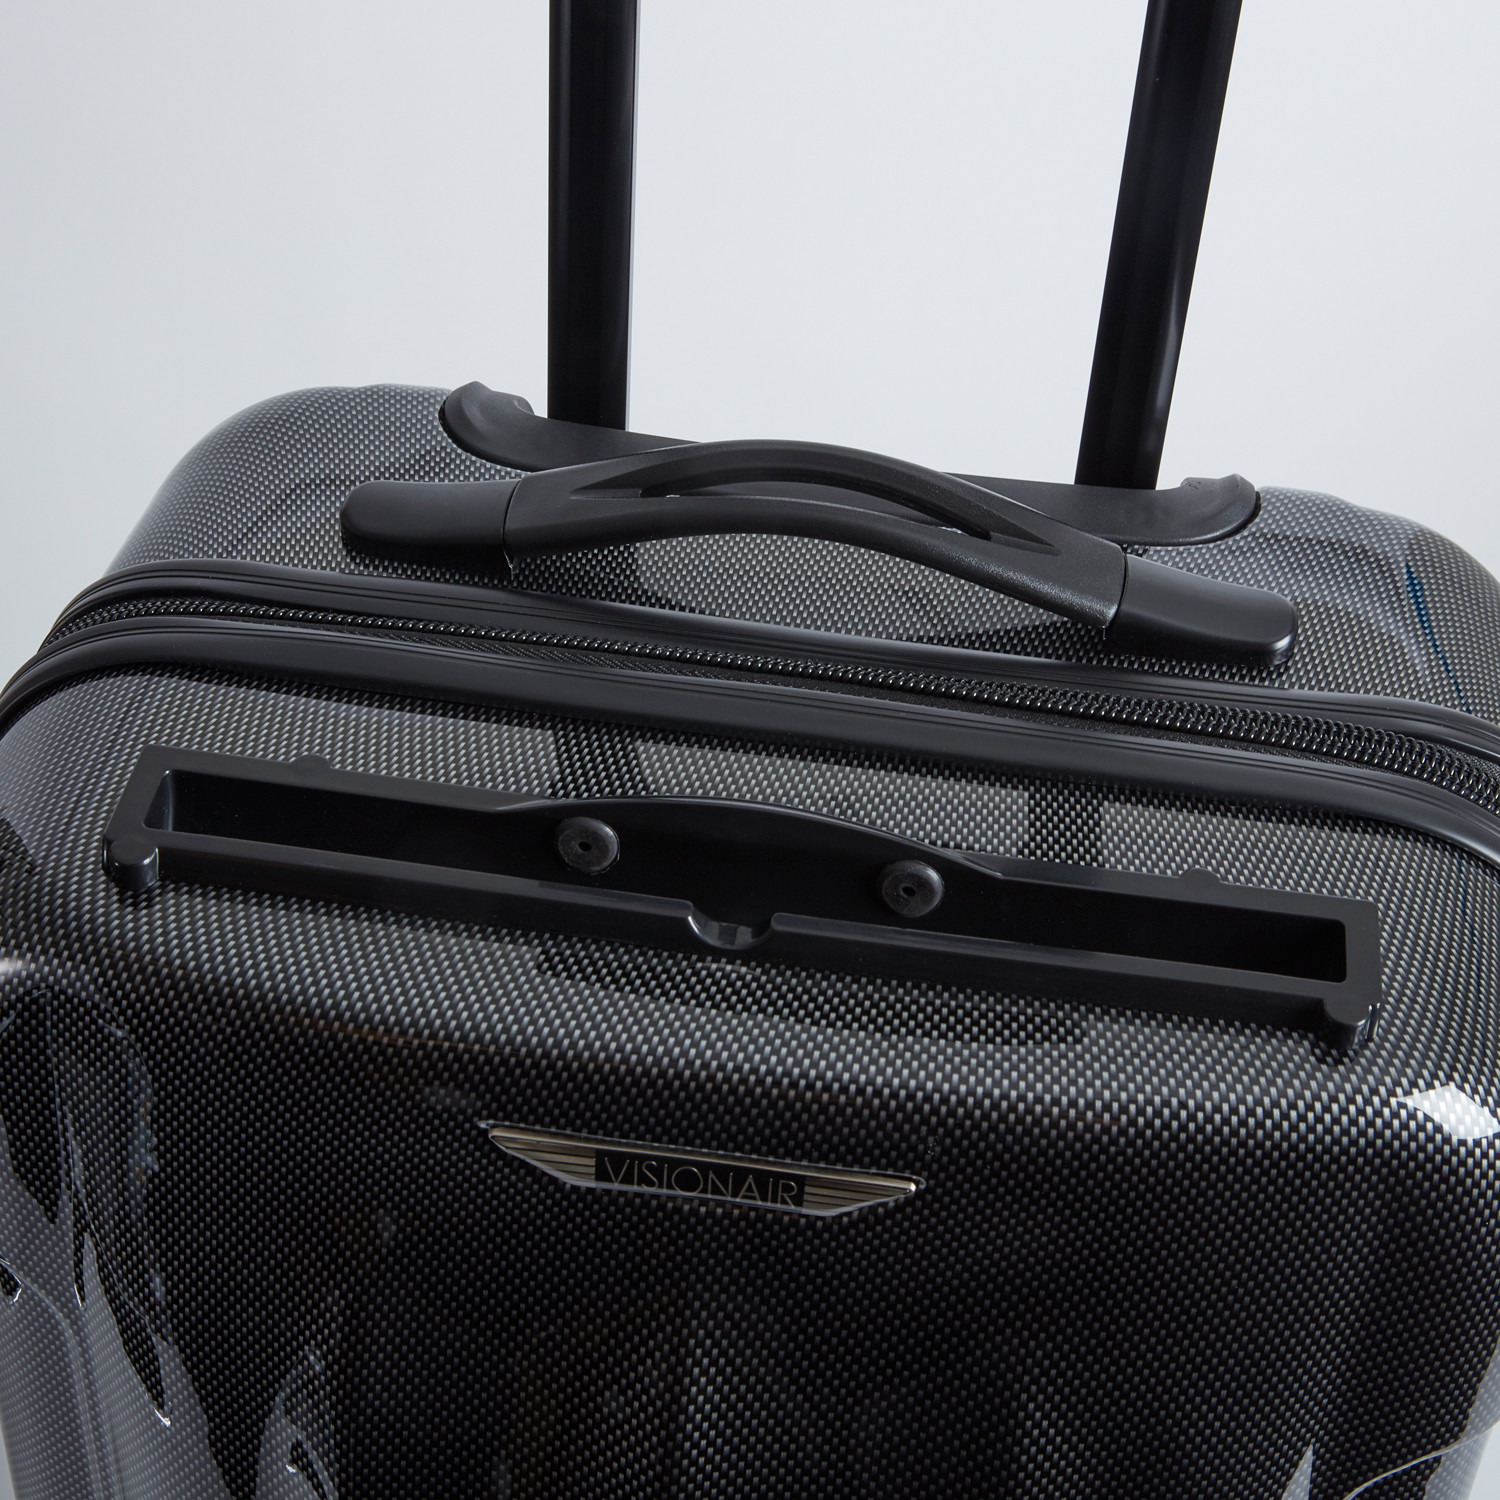 Podpal (Black Carbon) - Visionair Luggage - Touch of Modern